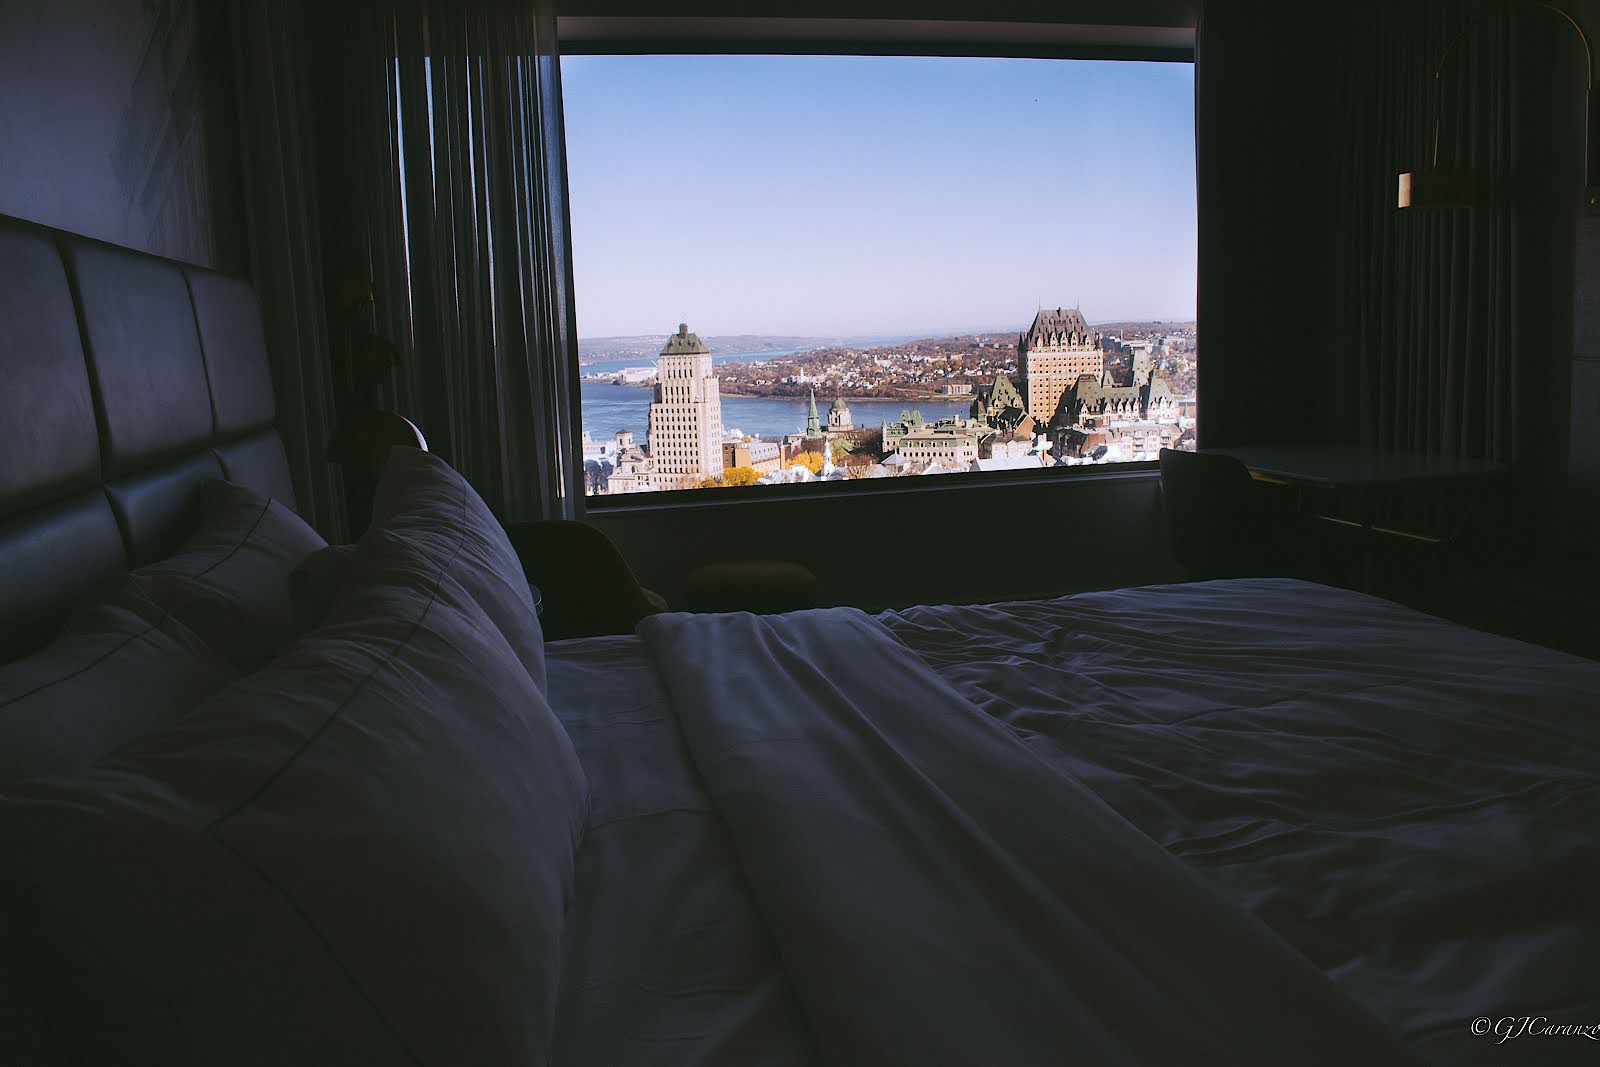 Travel Diary: Stunning Views of Old Quebec City, Canada from Hilton Hotel